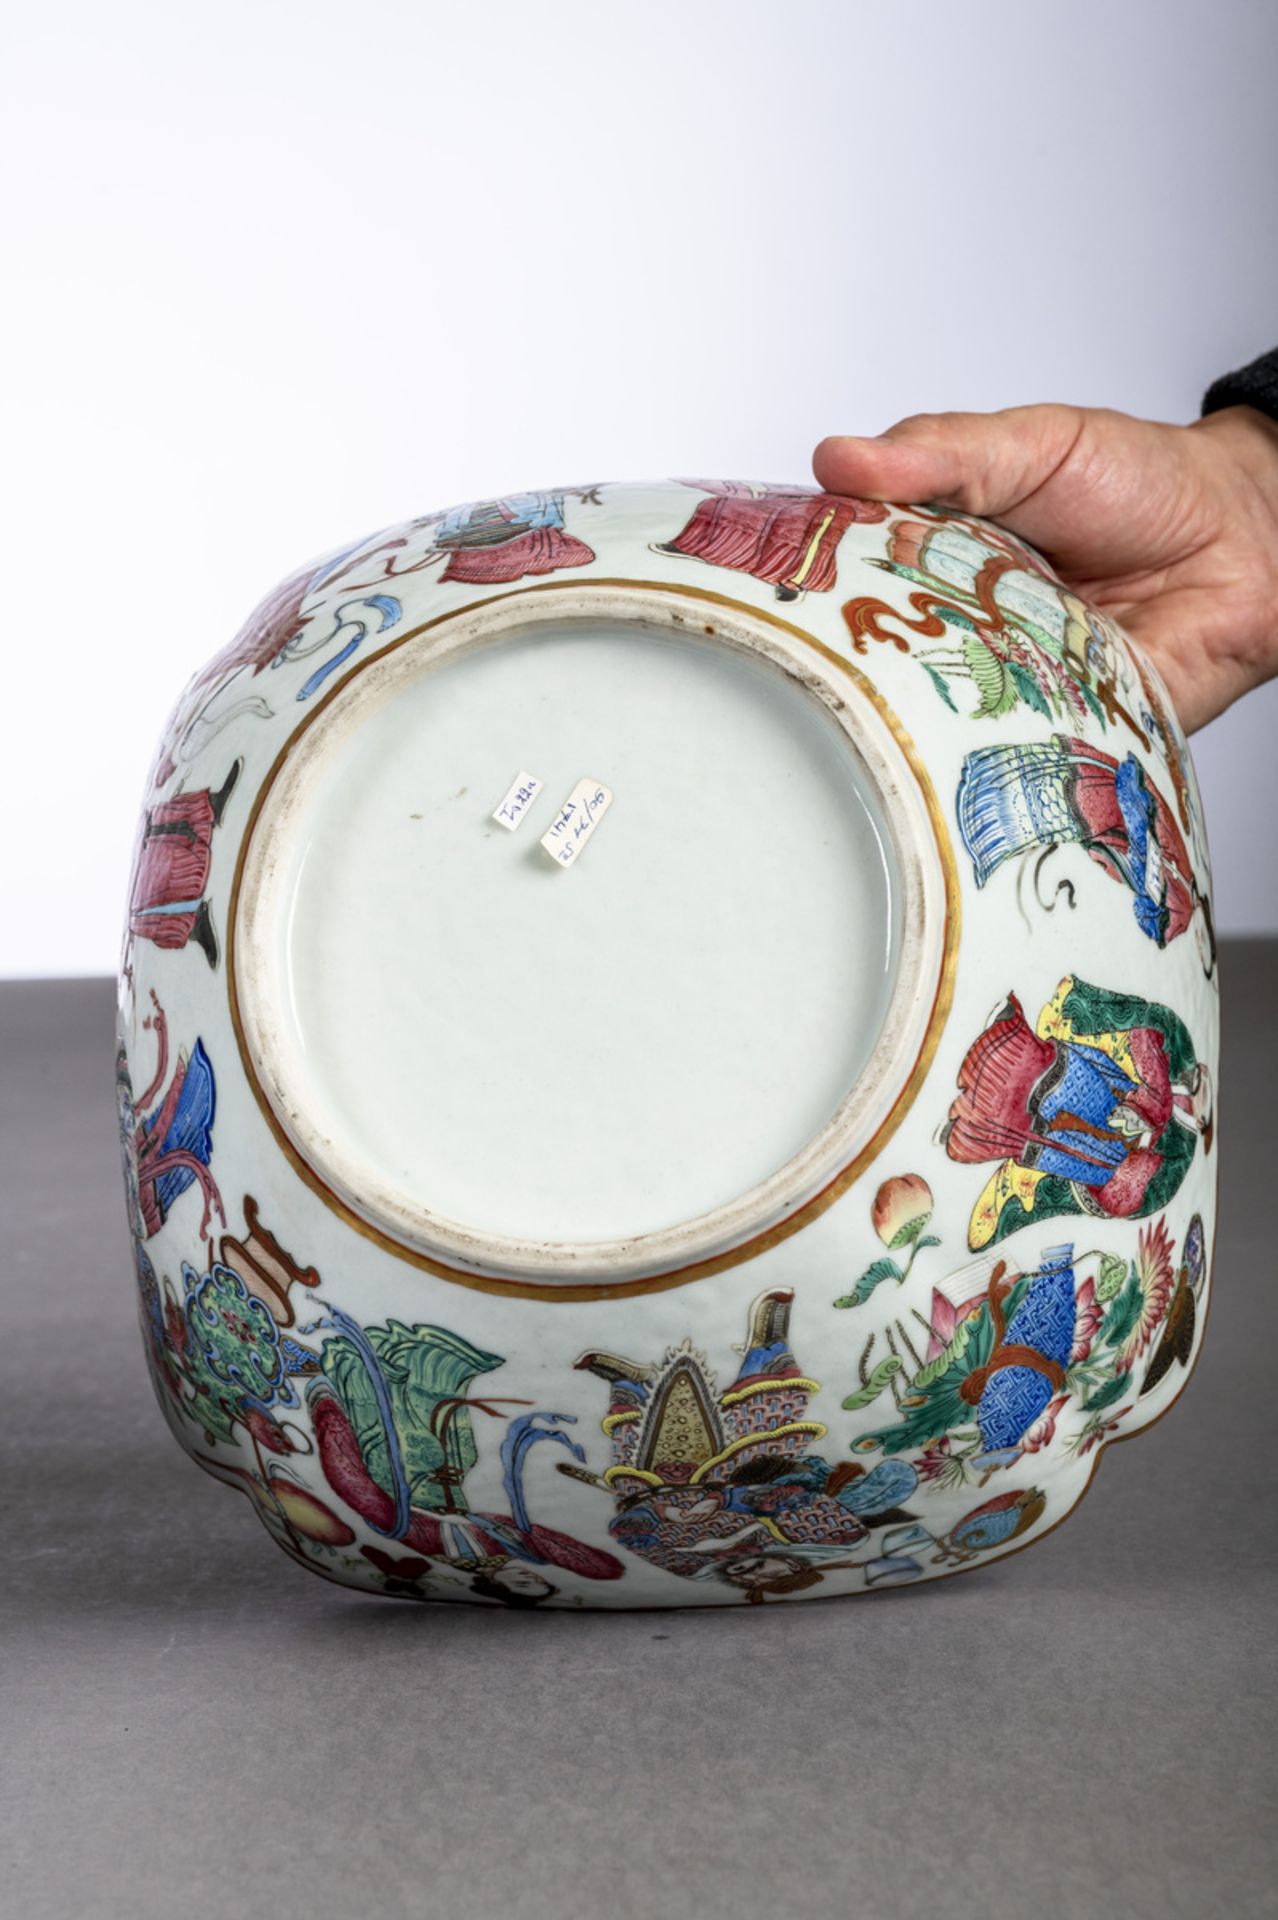 Lobed bowl in Chinese famille rose porcelain with gold rims 'characters', 19th century (11x24x24cm) - Bild 4 aus 5